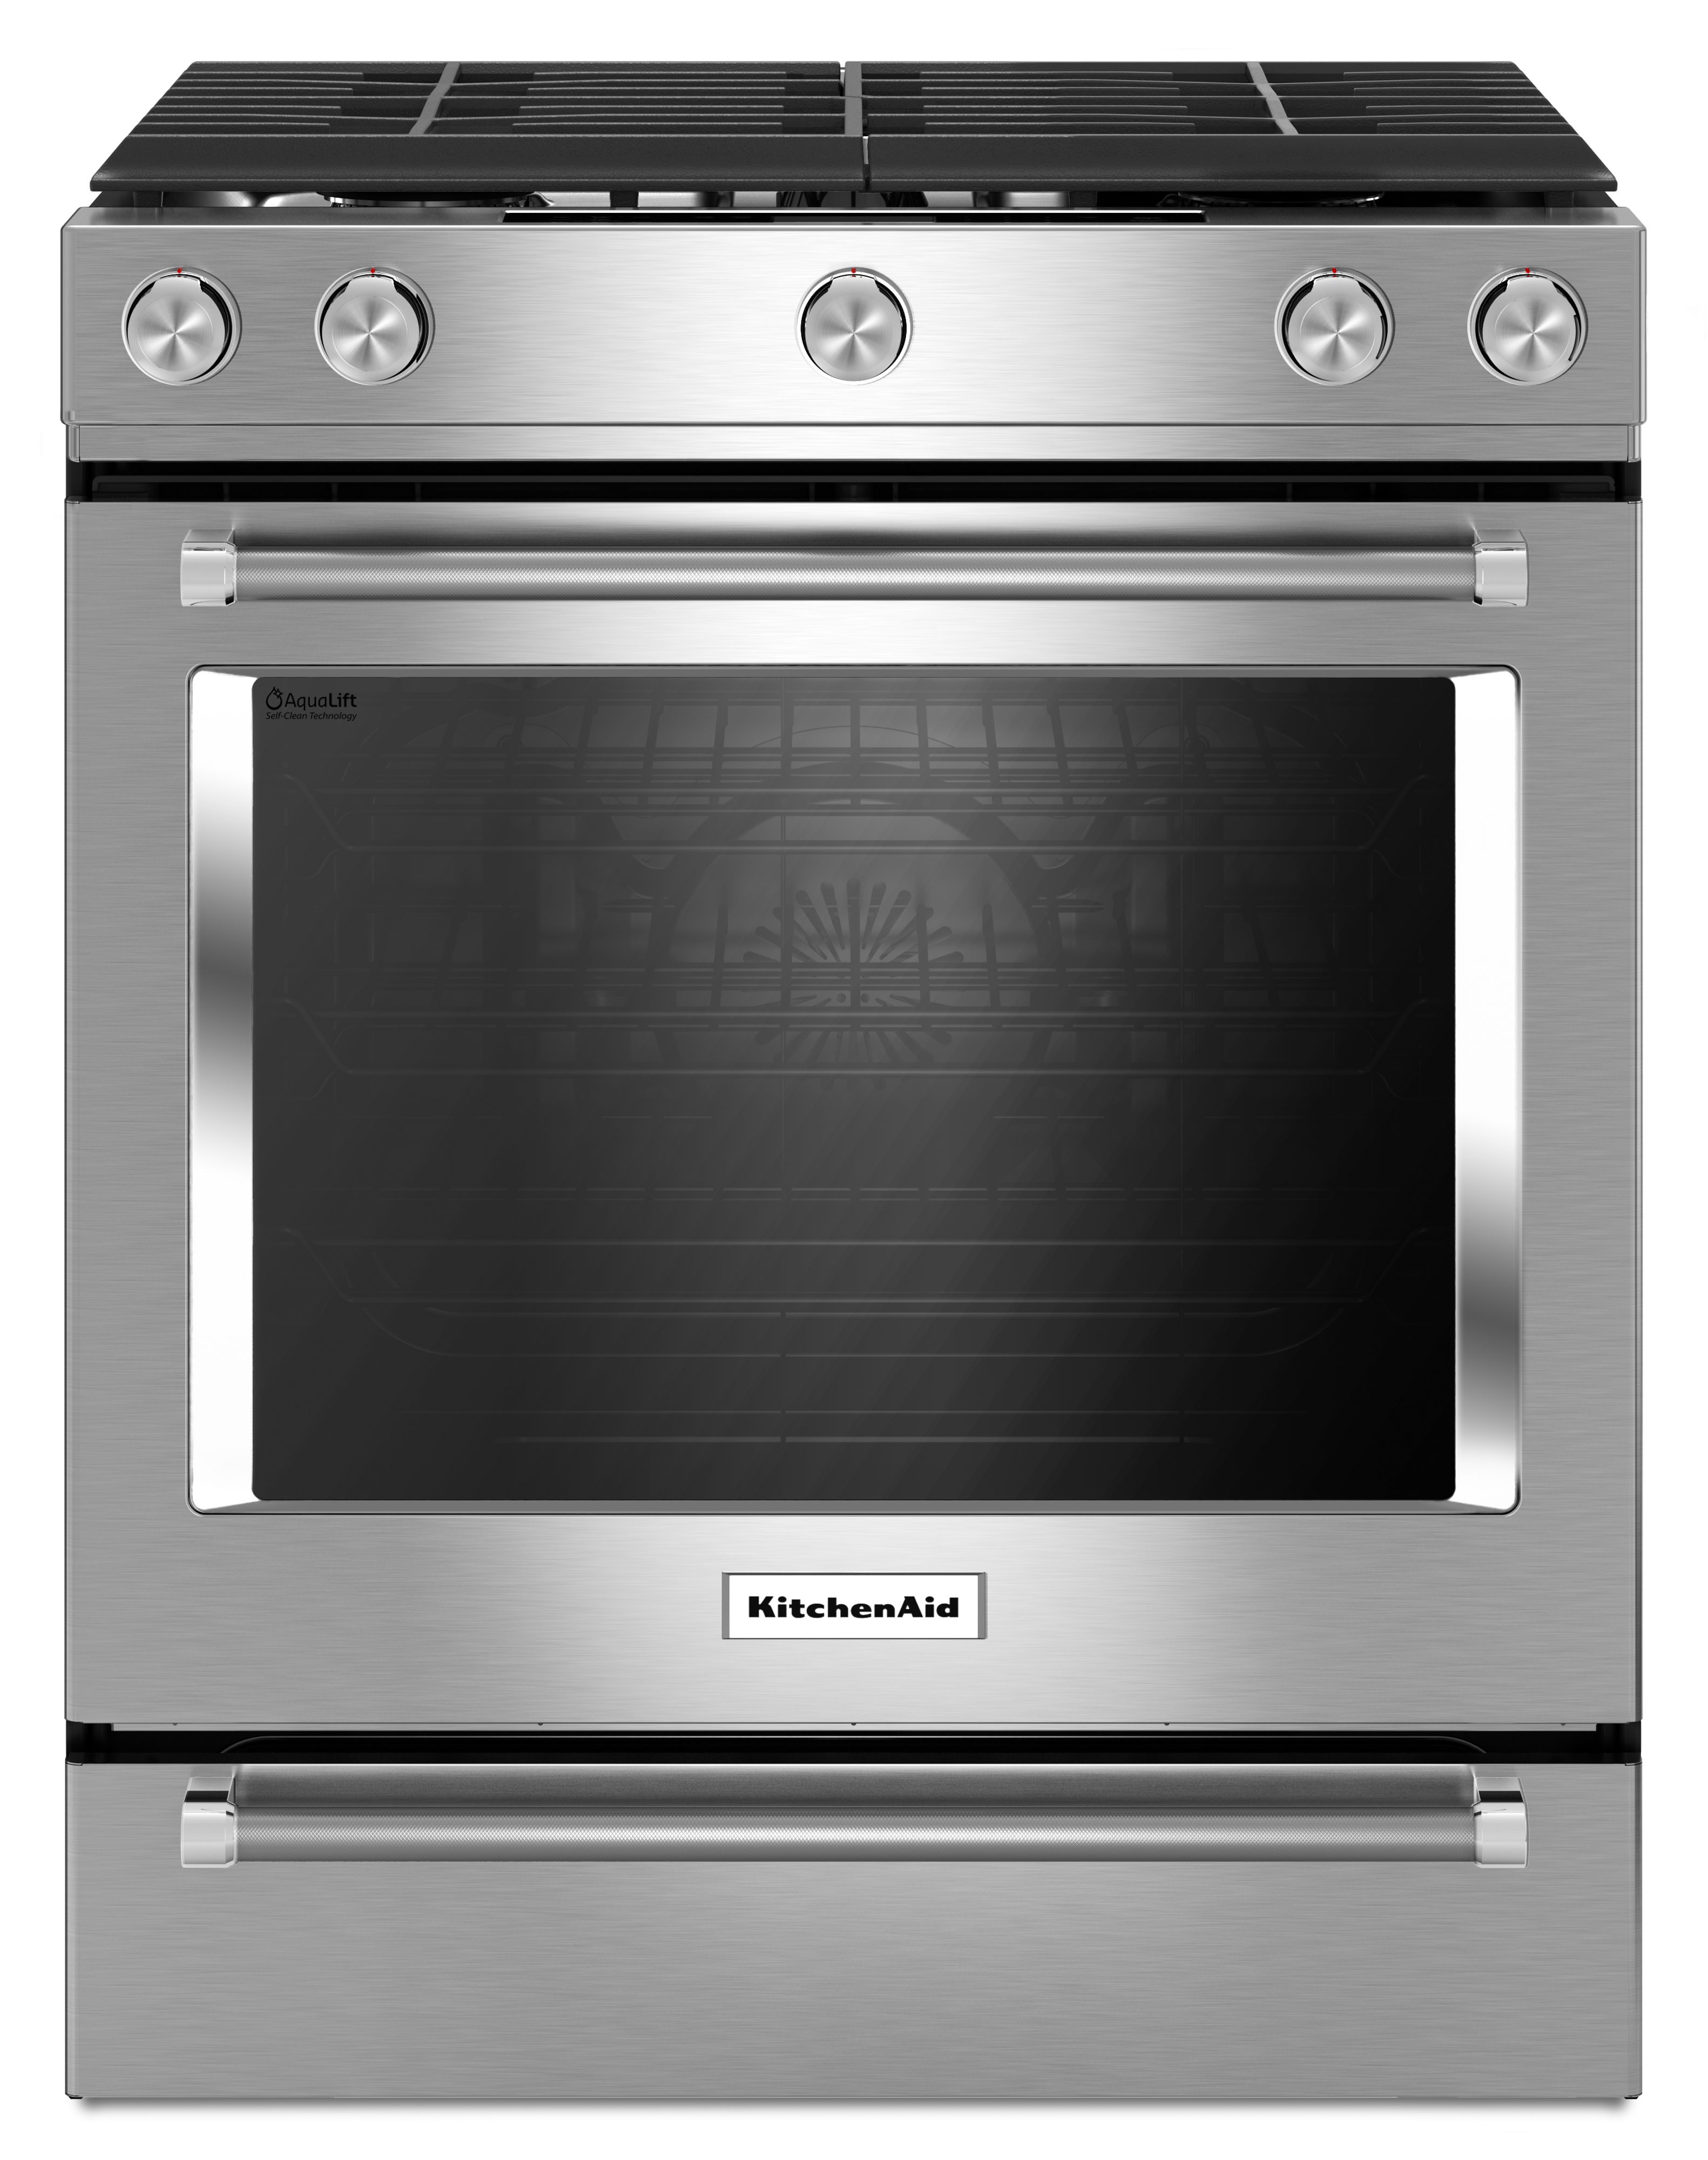 B-stock: Sliding board for the KitchenAid® in anthracite-gray